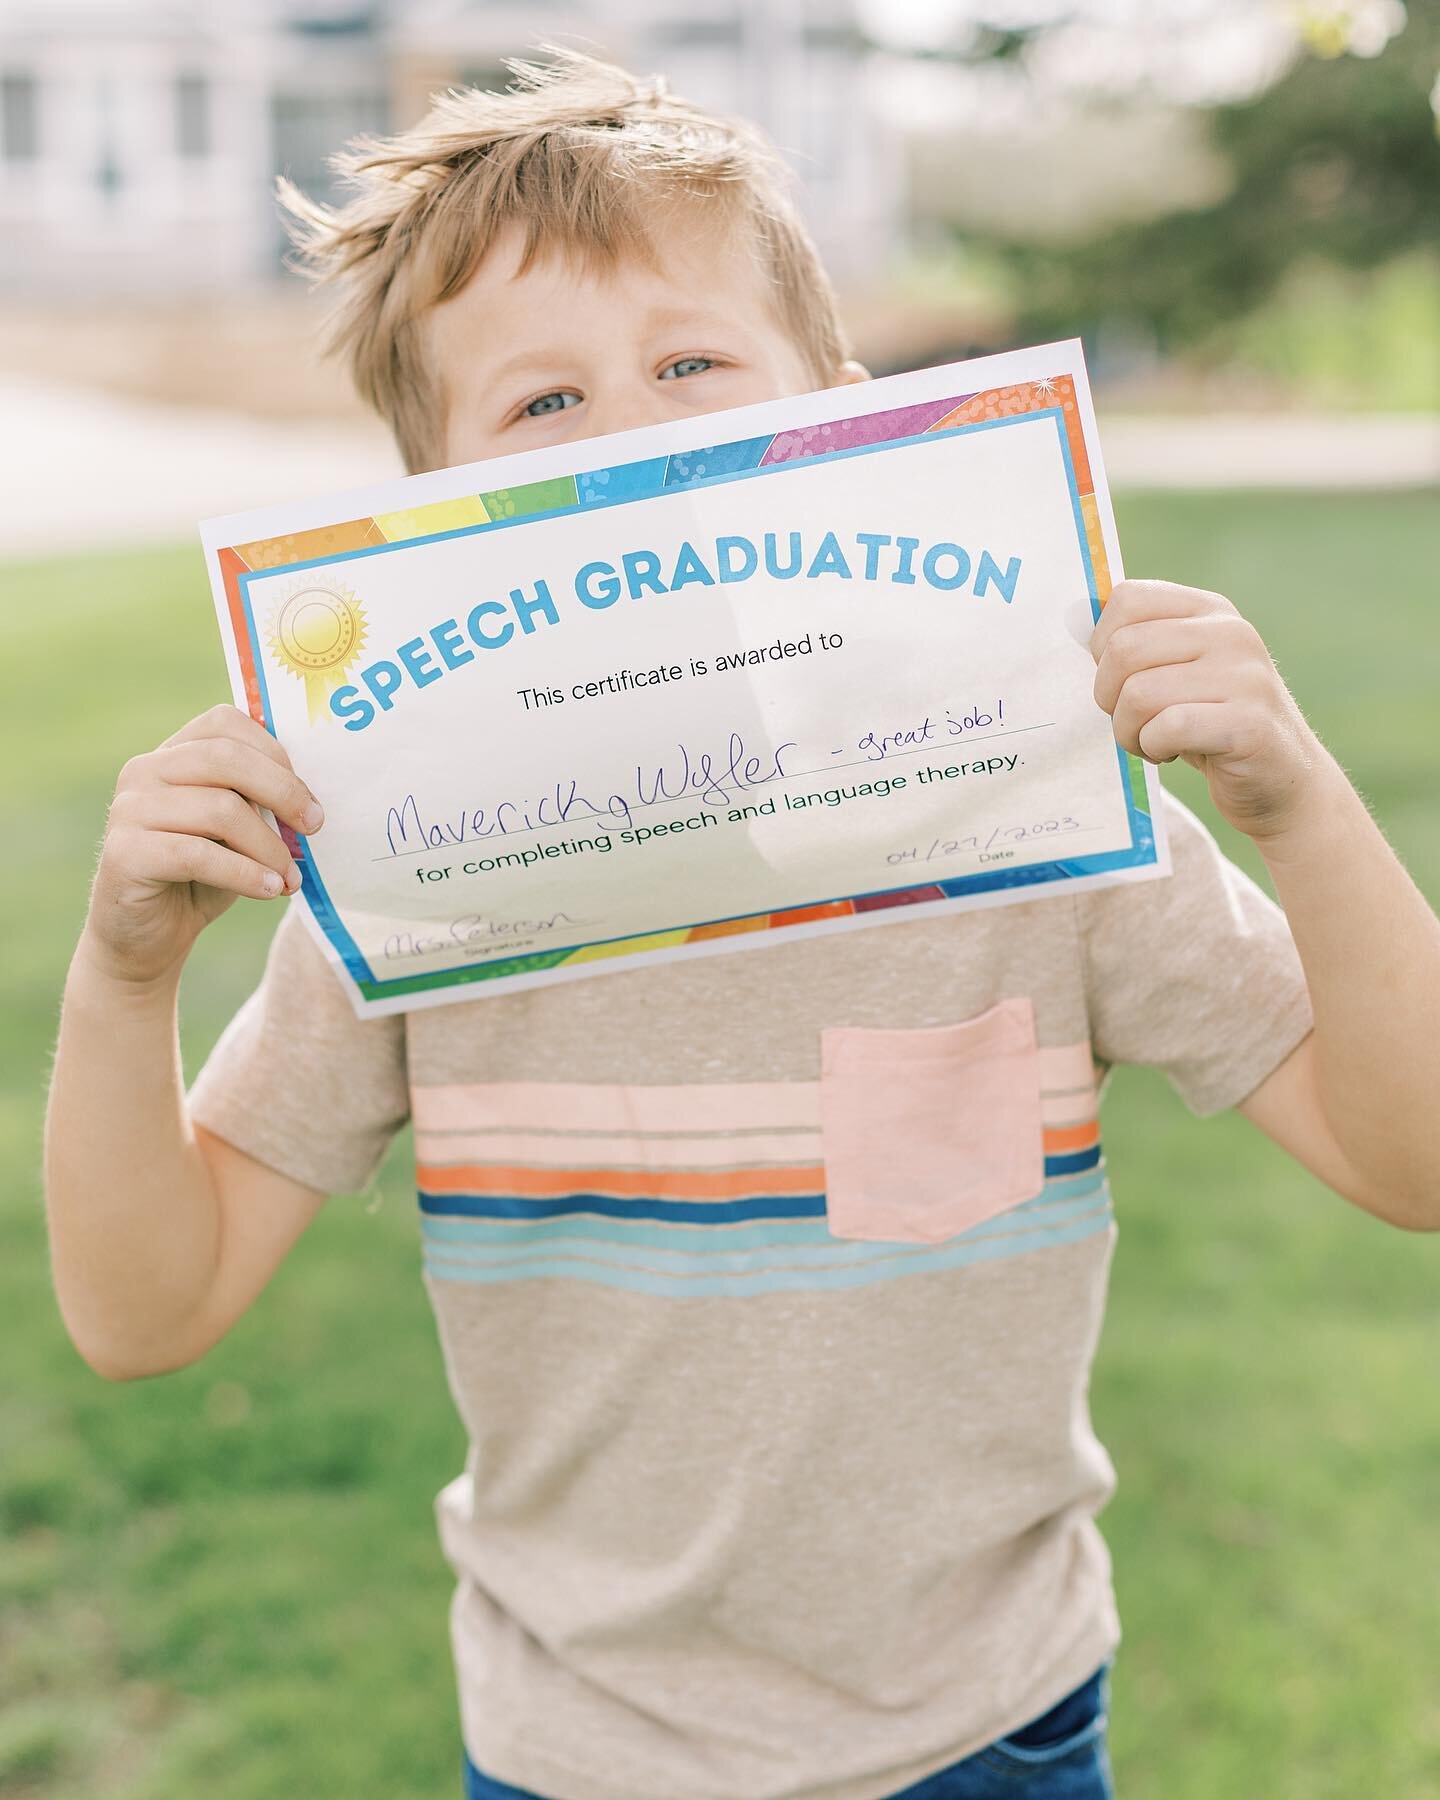 Big week for Mav last week&hellip; he graduated Speech! He originally started when he was 2 because he was a late talker, then worked on some speech sounds when he got to school, and now he won&rsquo;t stop talking our ears off! So proud of this kid 